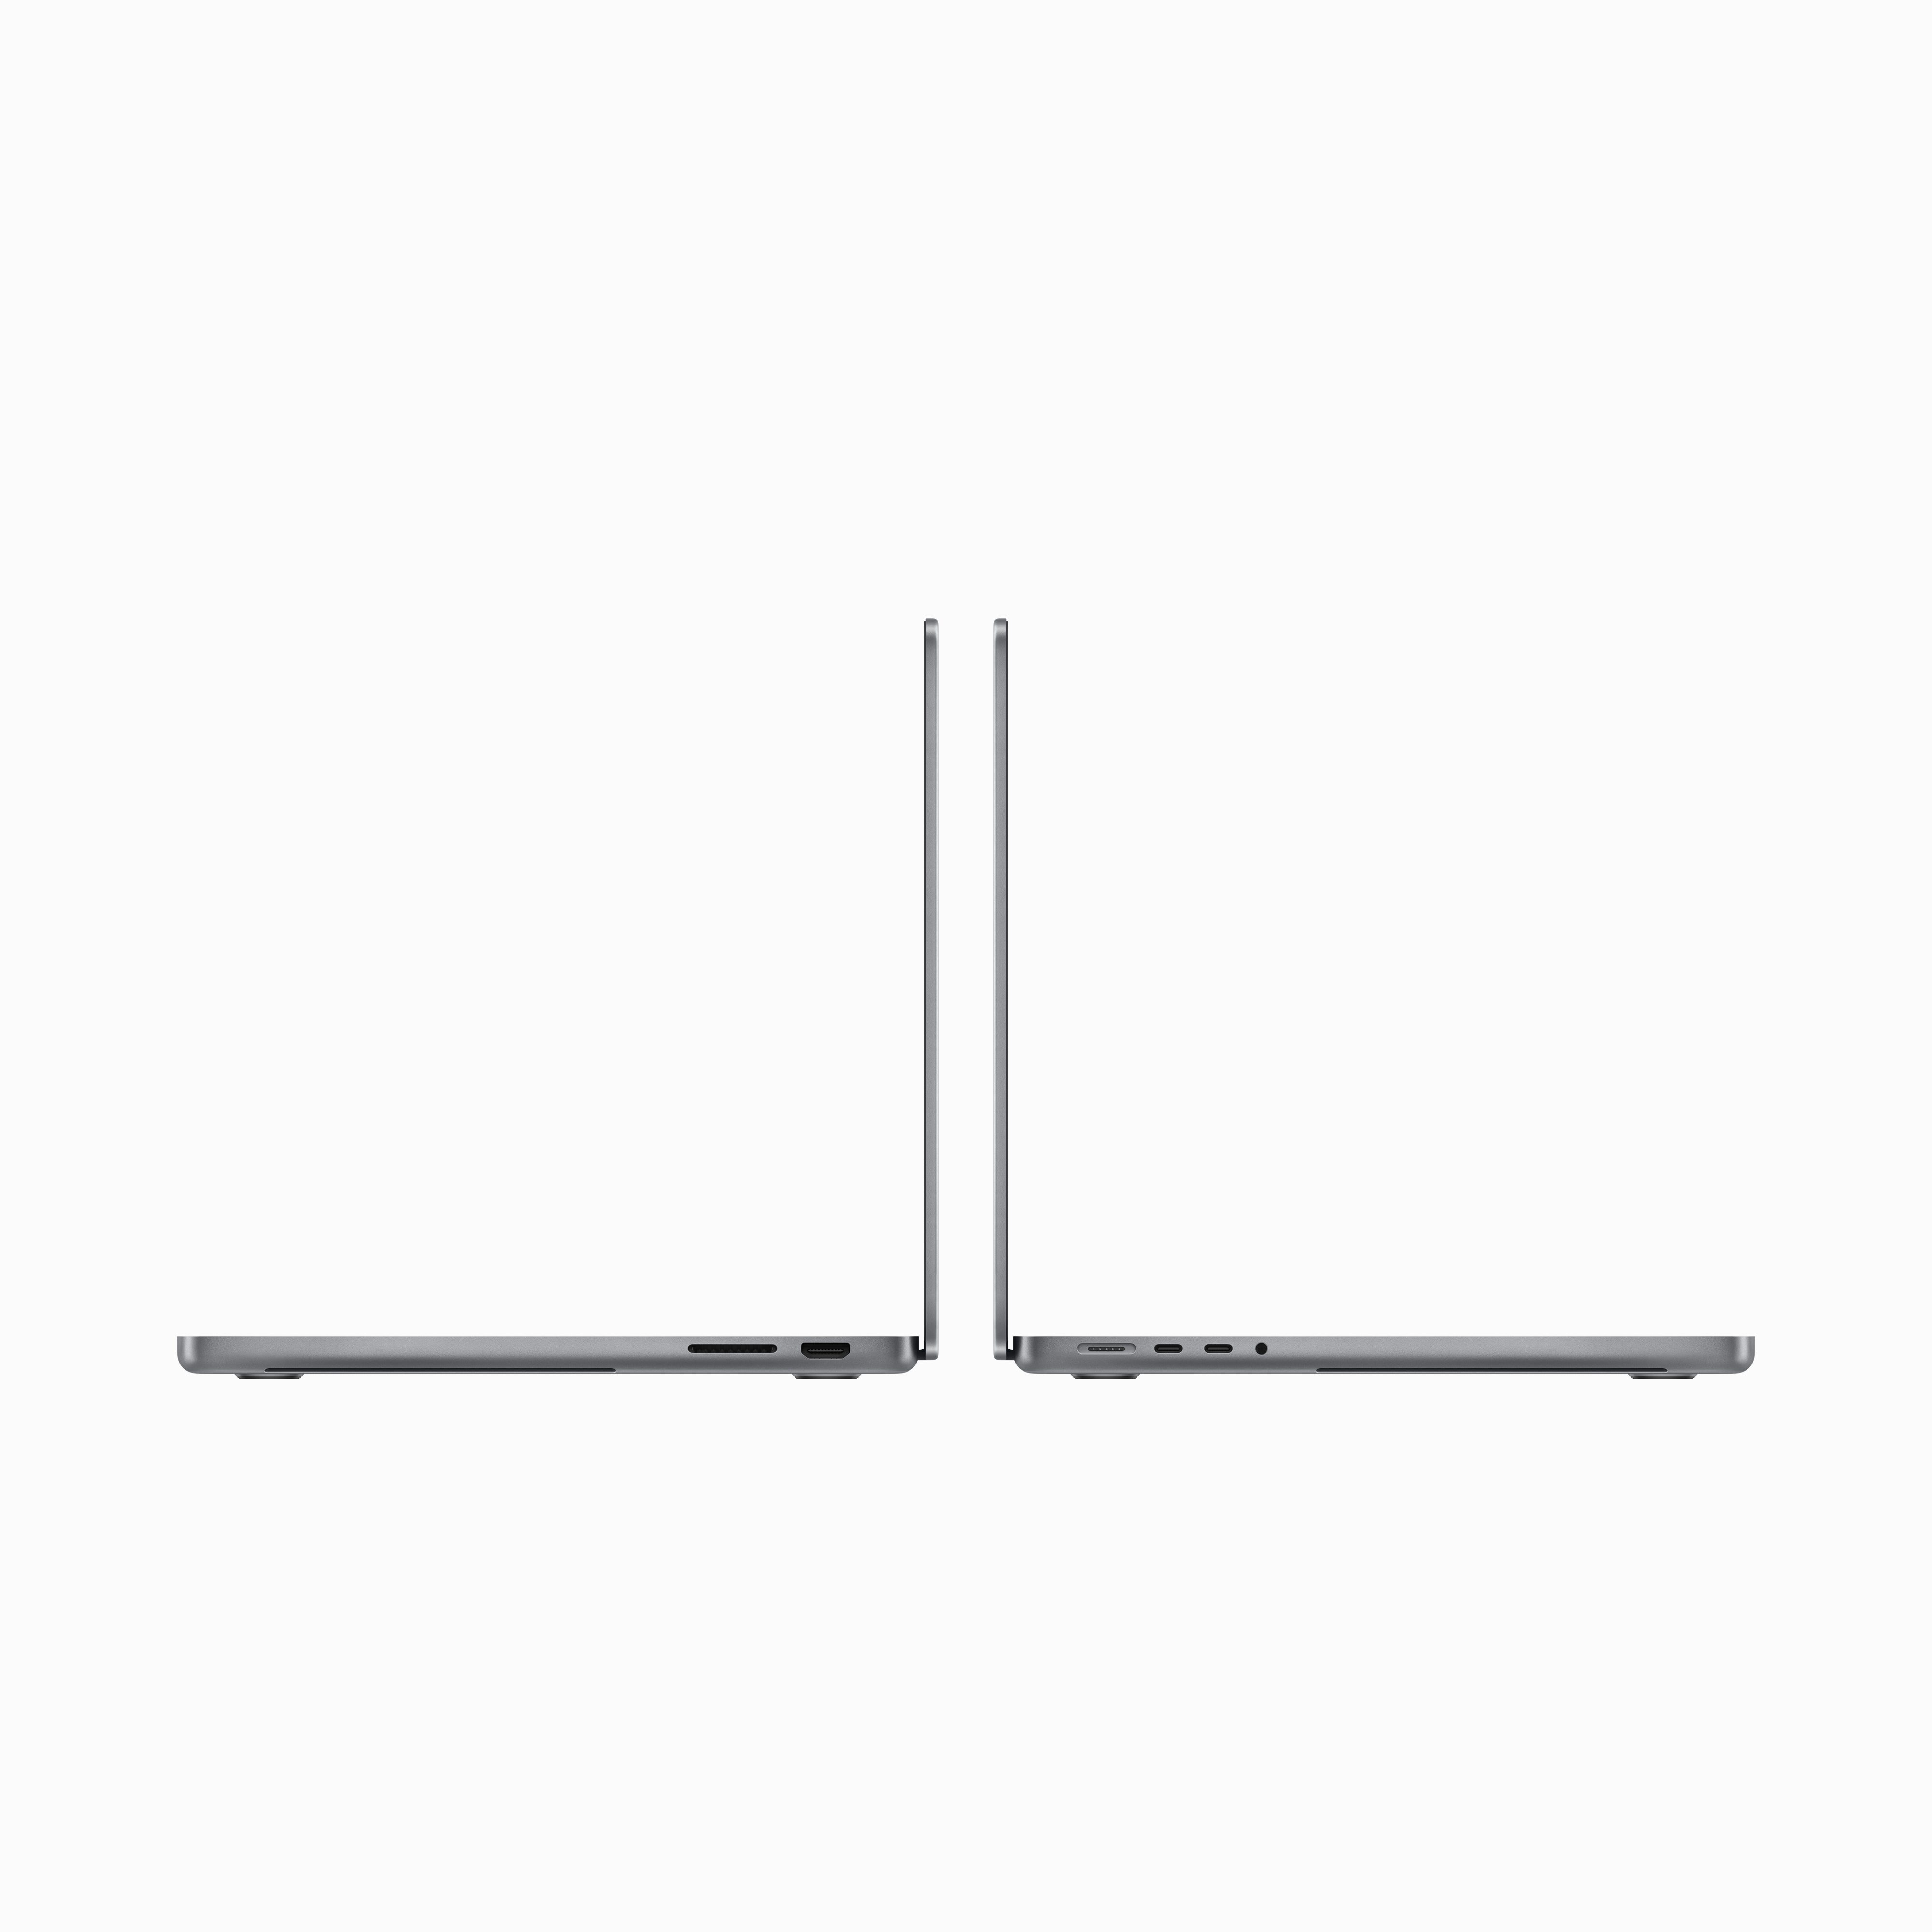 14-inch MacBook Pro: Apple M3 chip with 8C CPU and 10C GPU, 512GB SSD - Space Grey